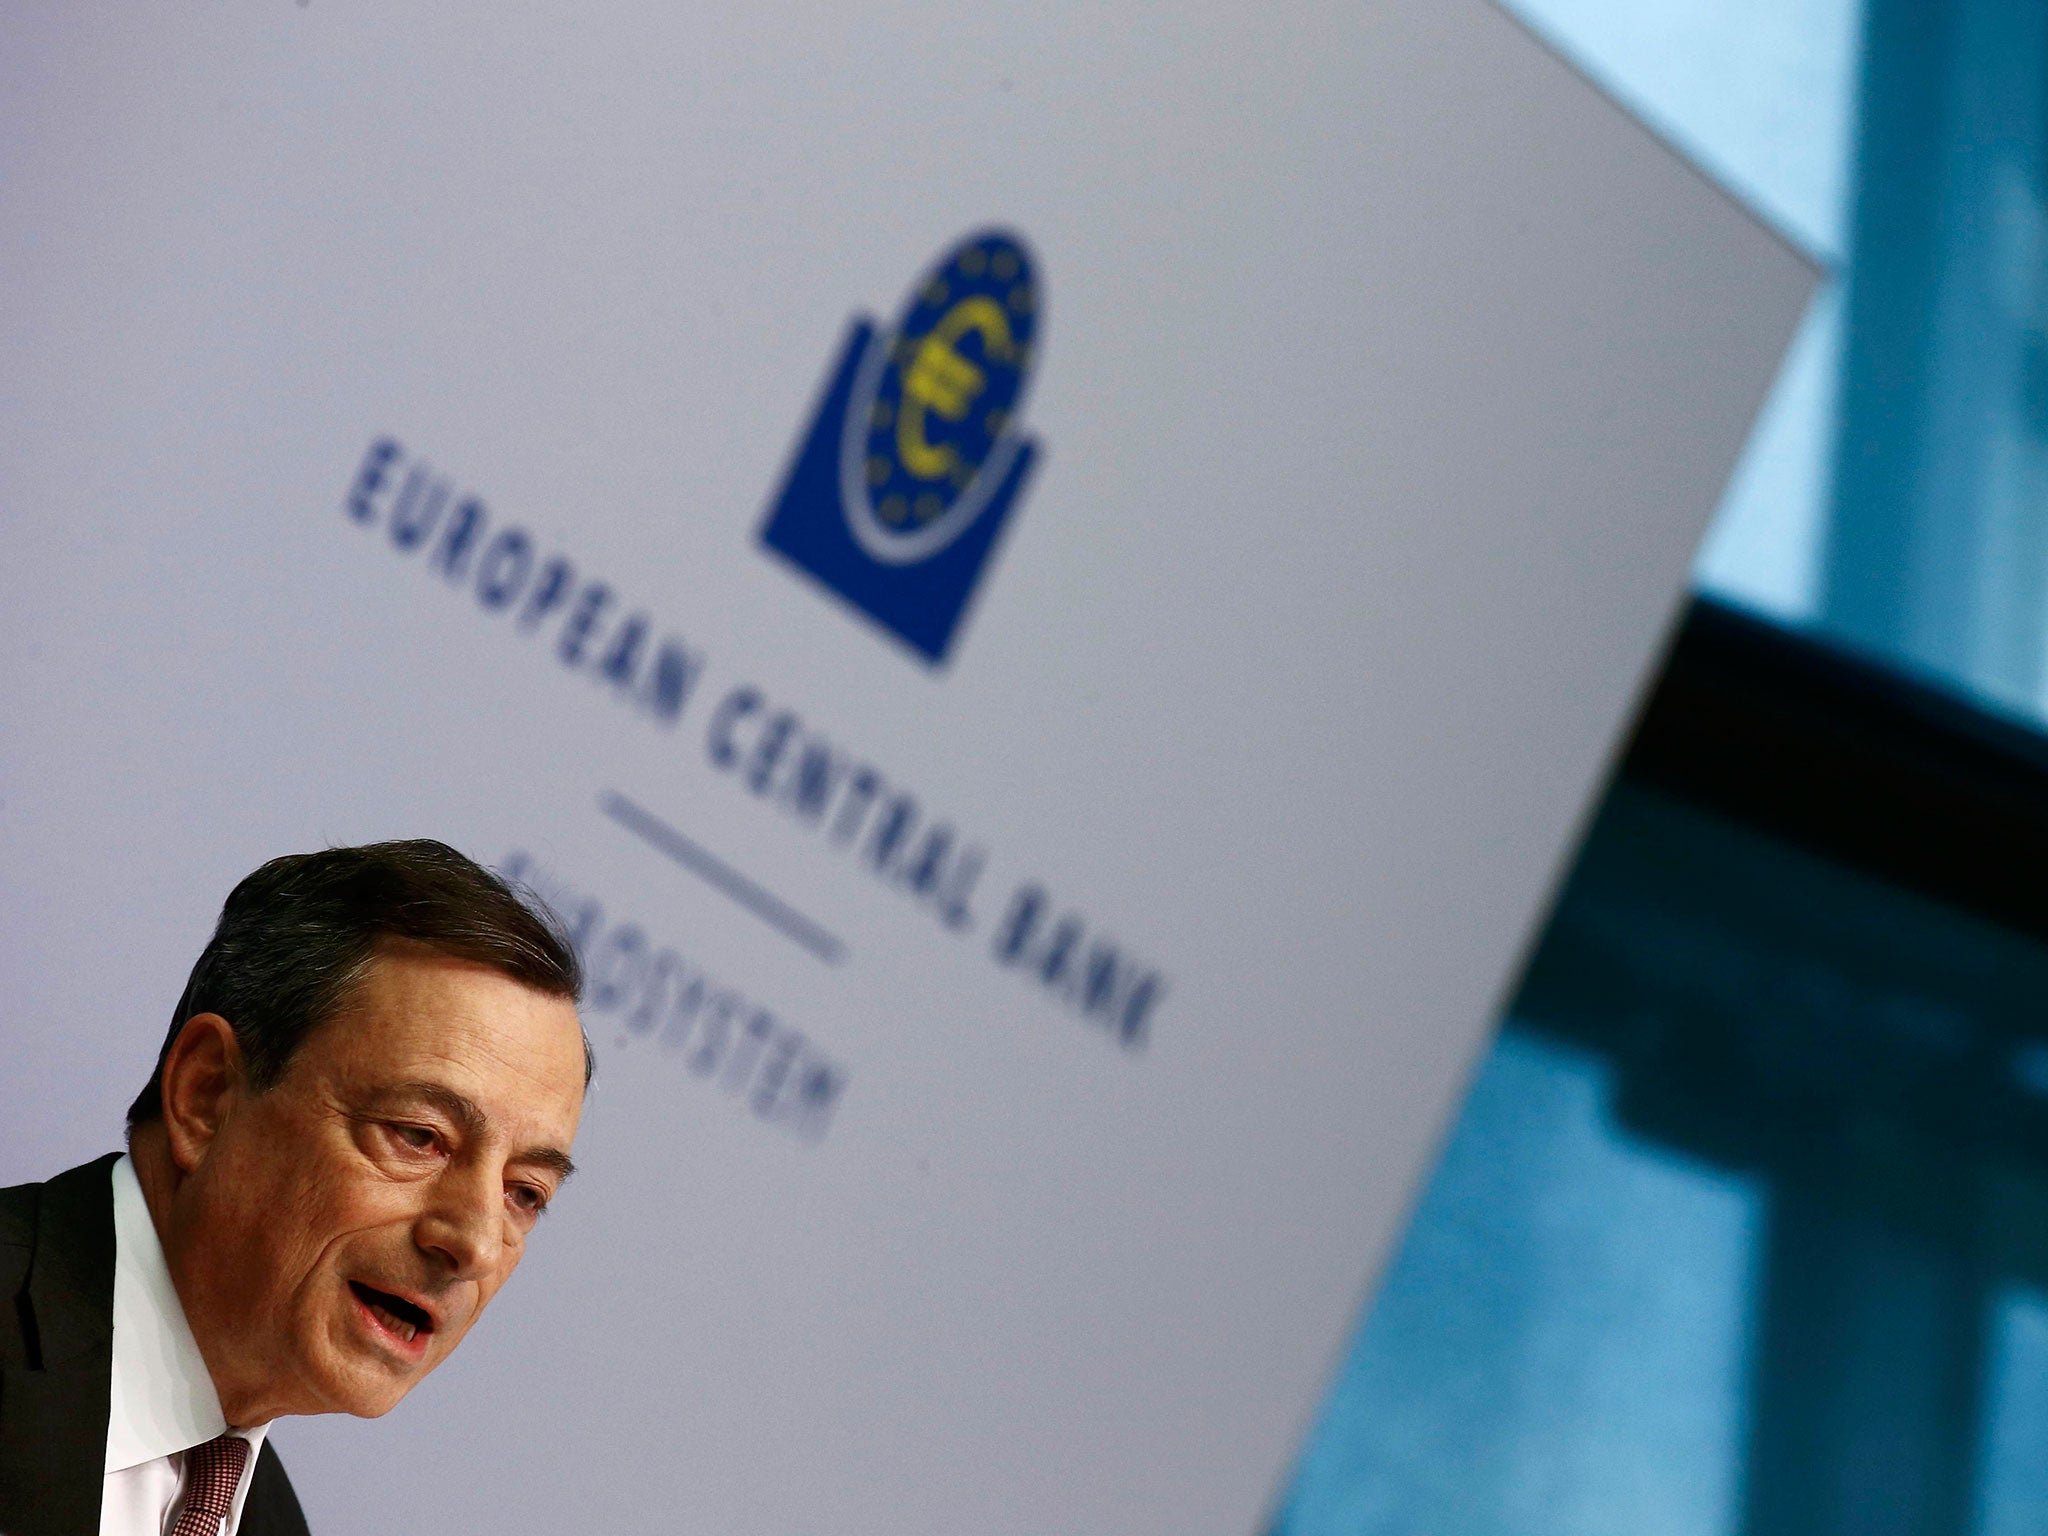 Mario Draghi inisted the recovery was ‘on track’ at the ECB press conference in Frankfurt